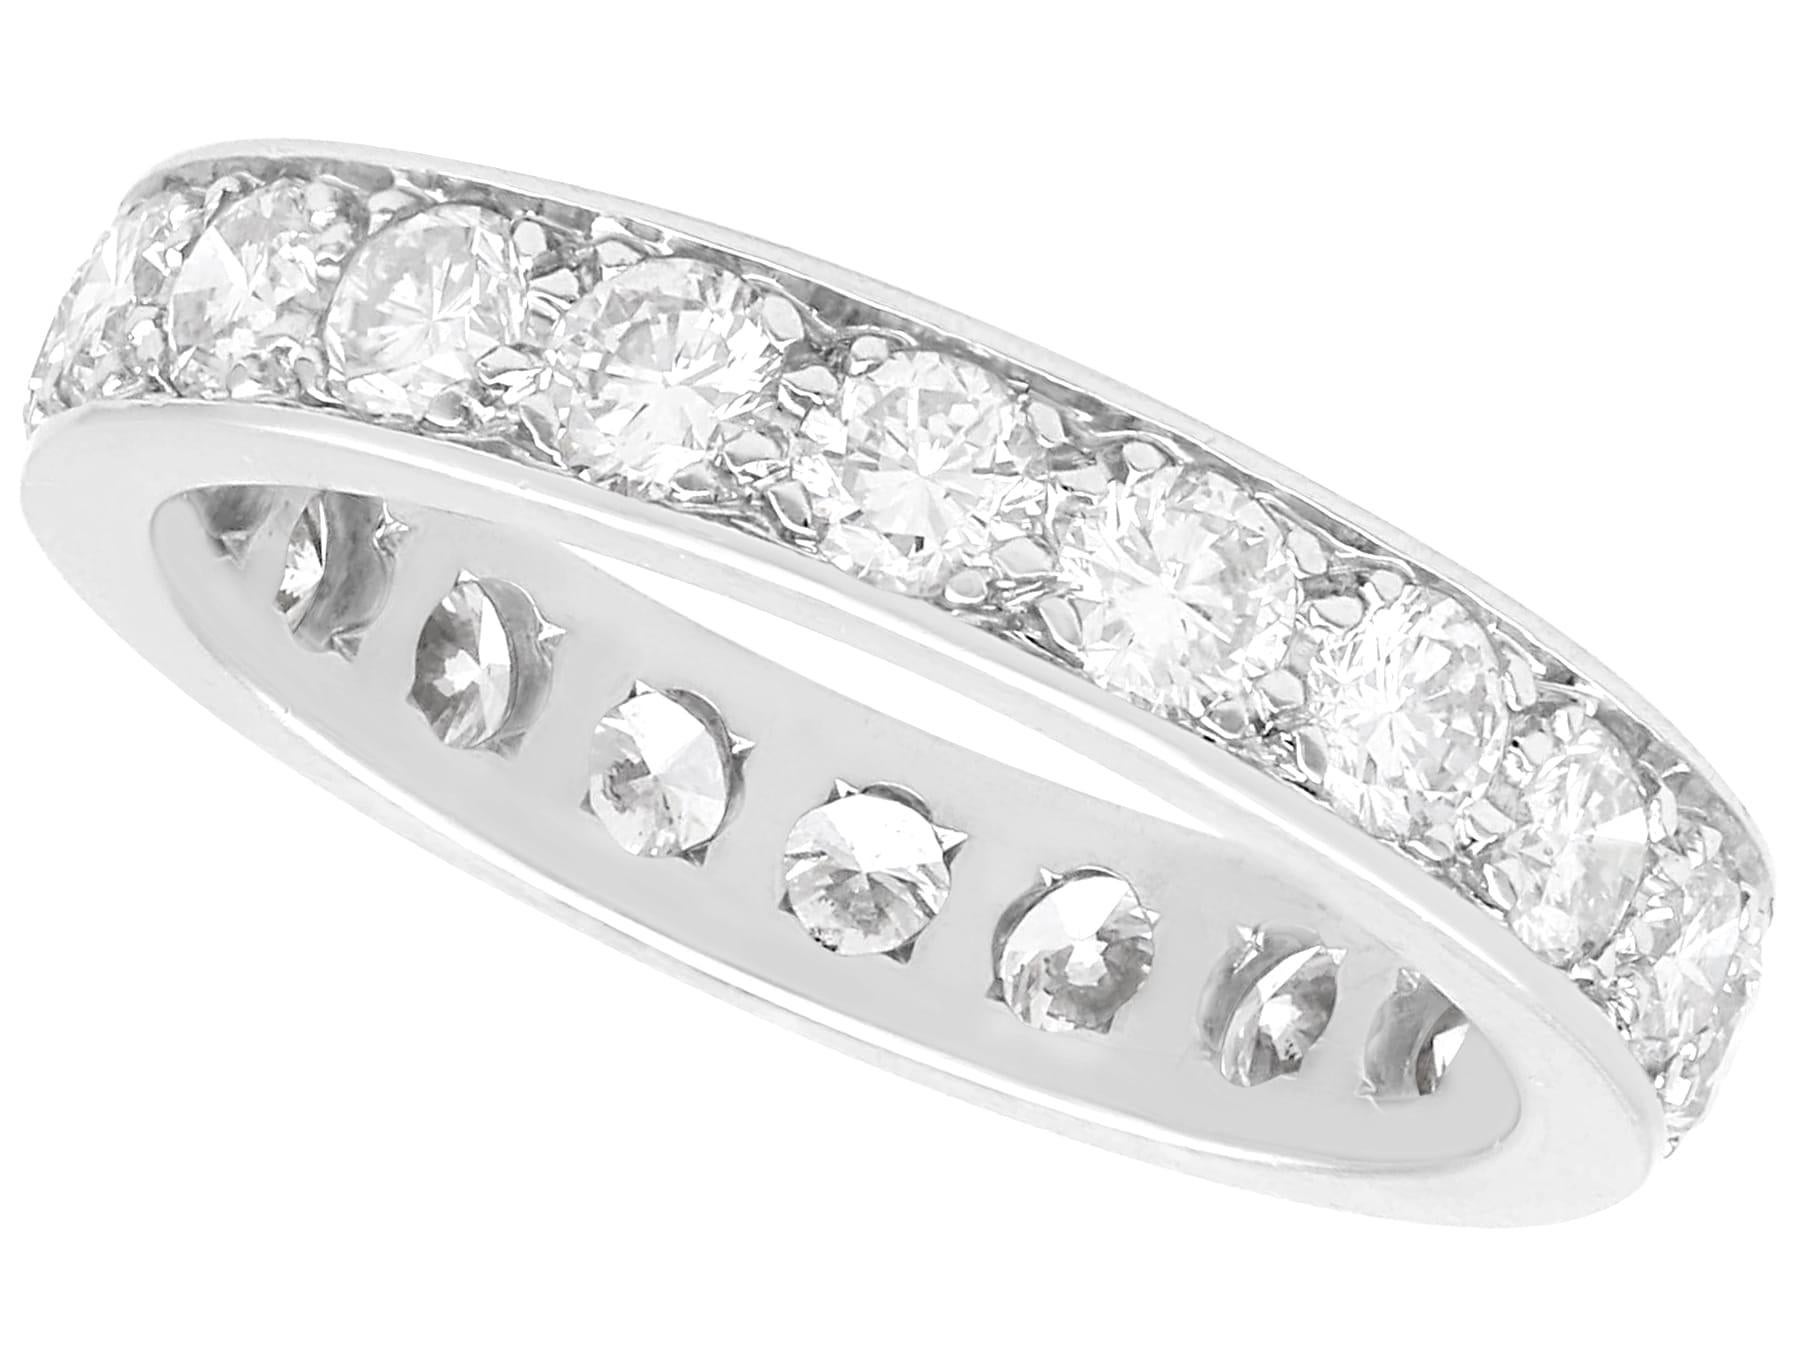 Antique 1.28Ct Diamond and 18k White Gold Full Eternity Ring Circa 1935 For Sale